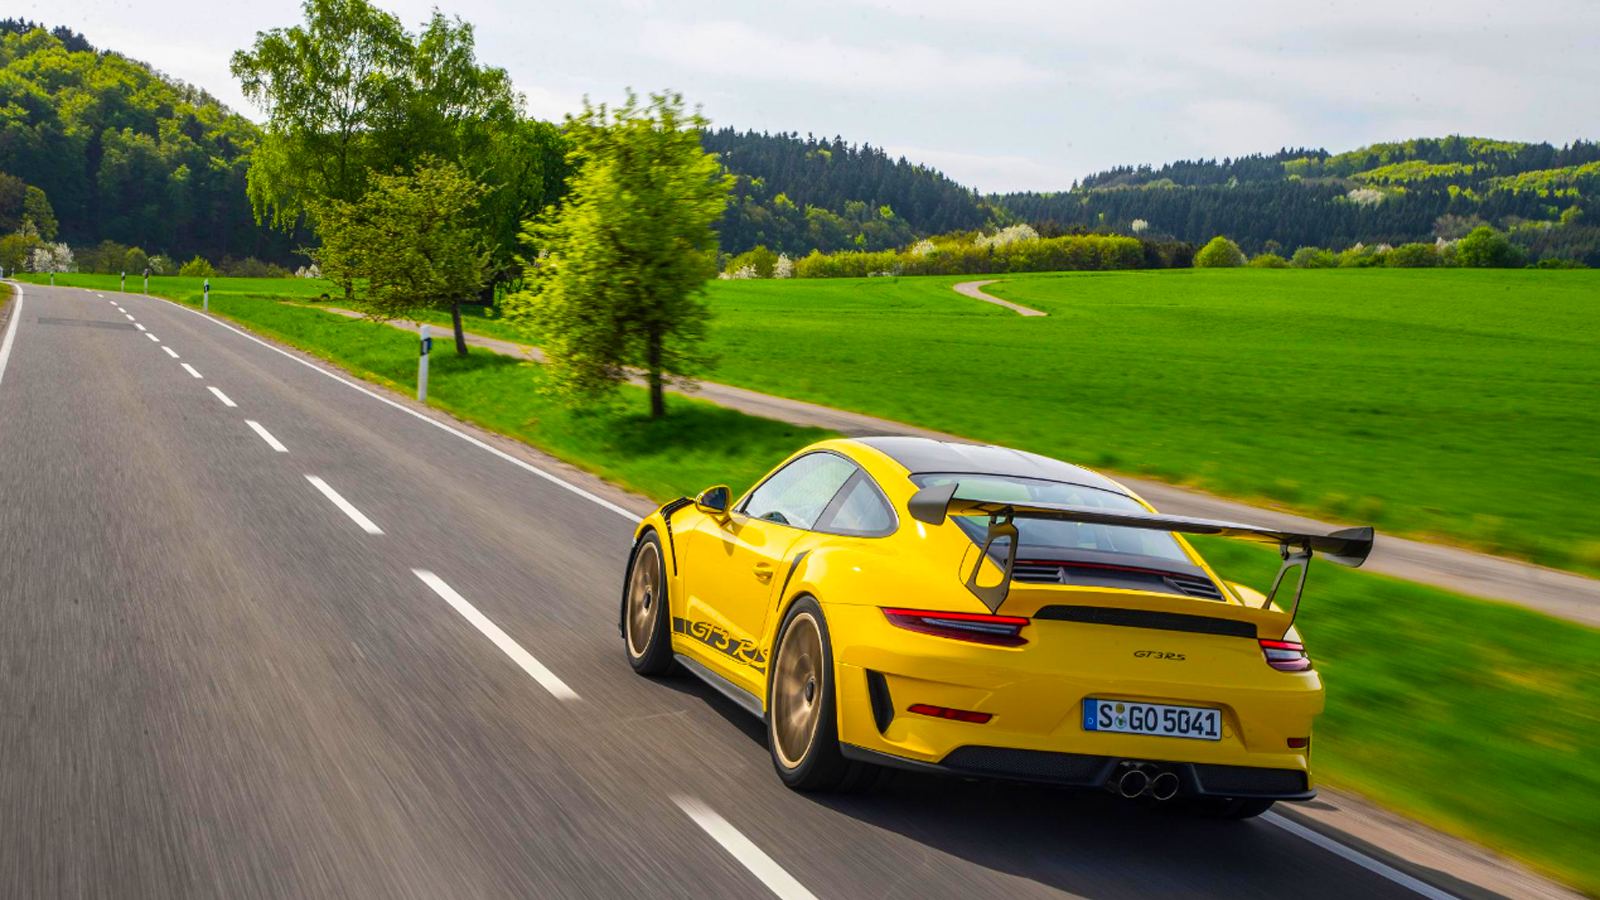 Born from Racing: the New 2019 Porsche 911 GT3 RS